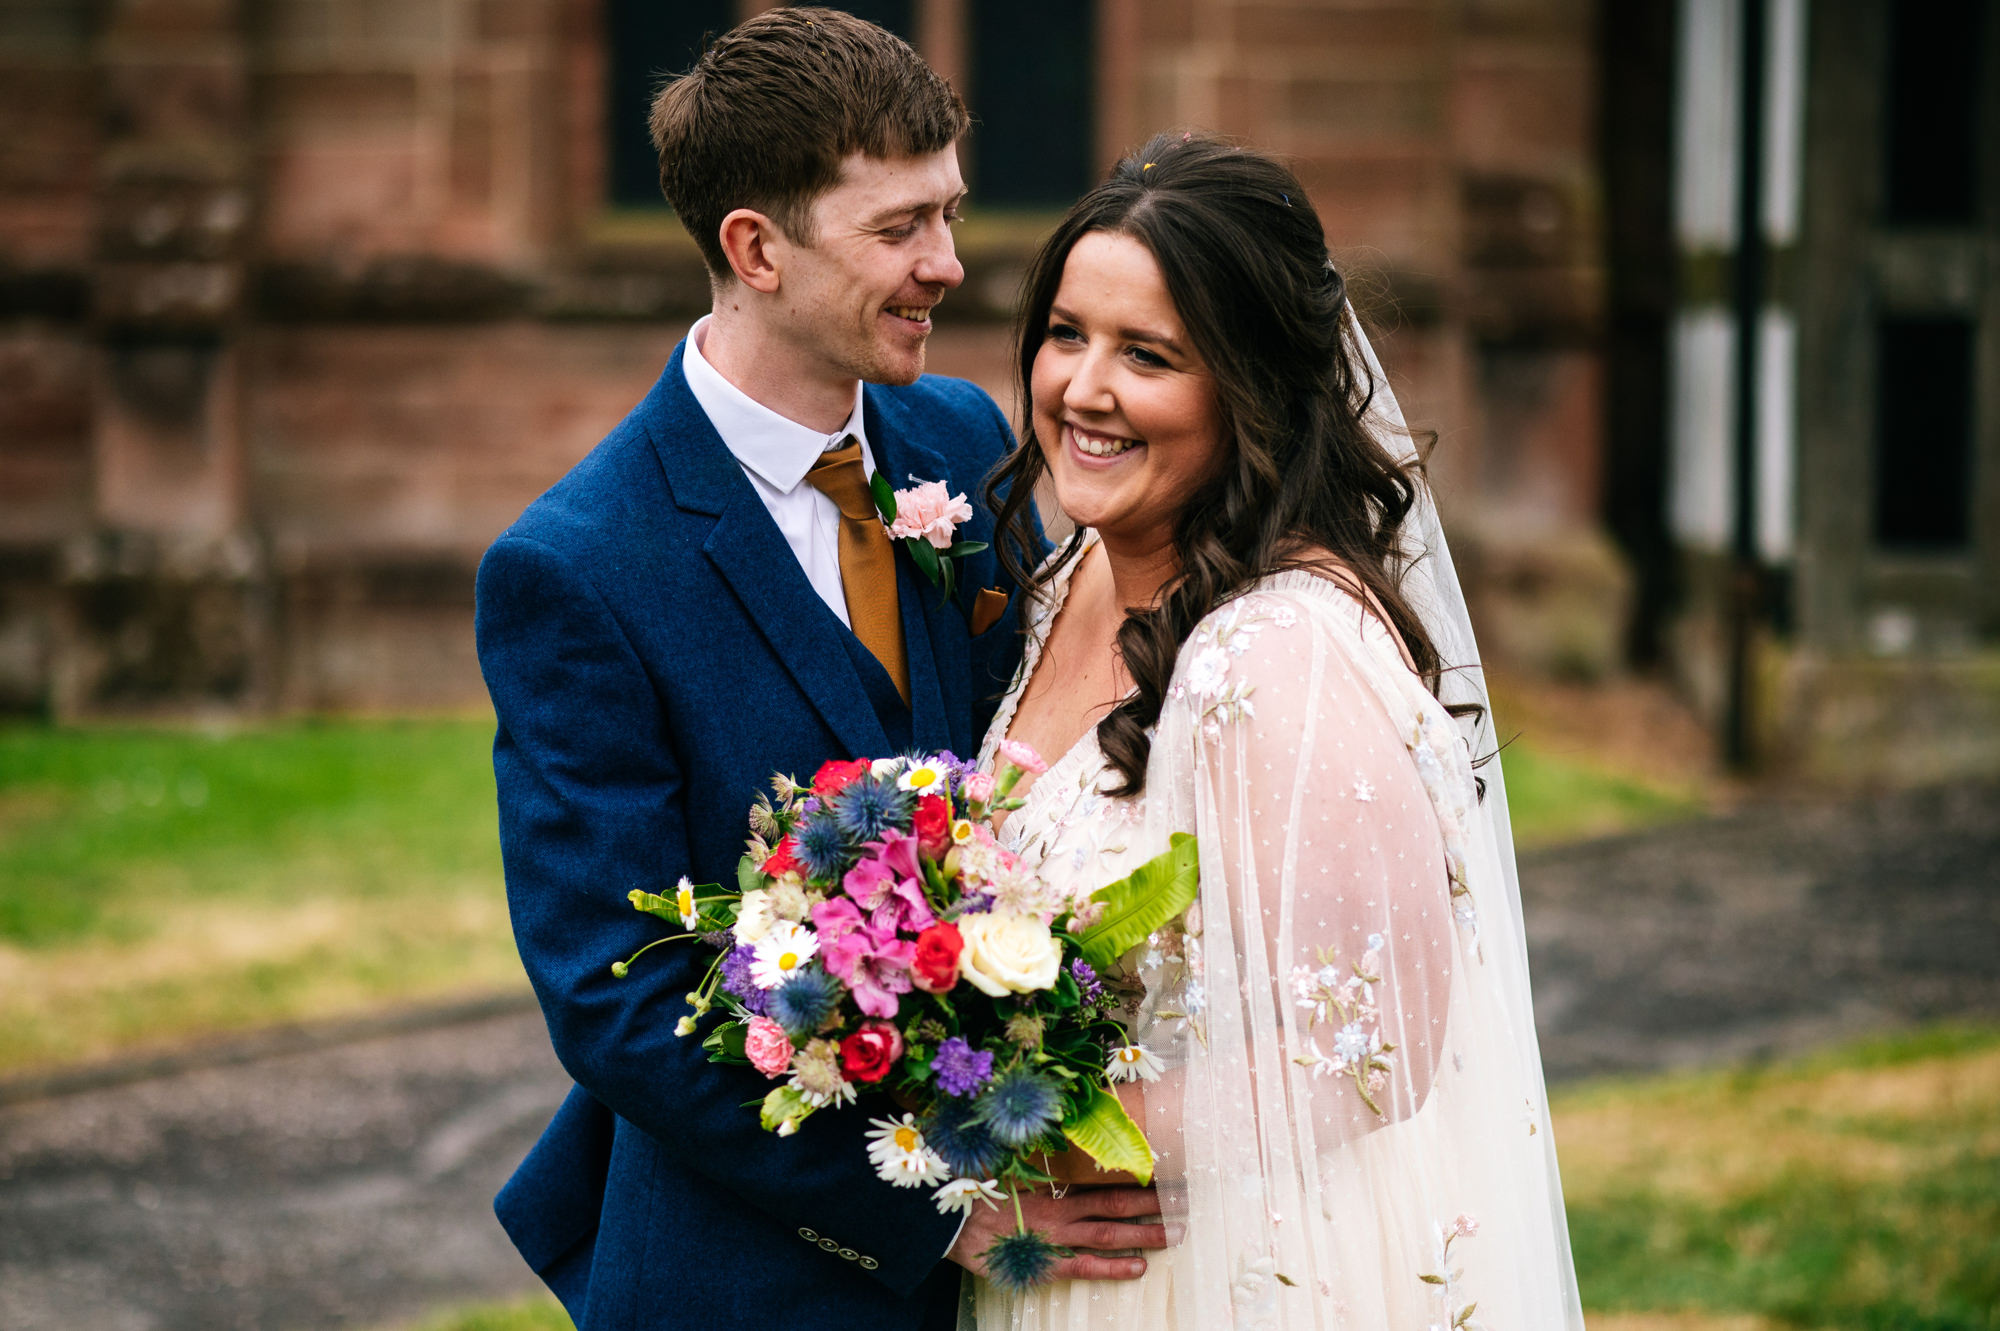 relaxed and natural bride and groom portrait